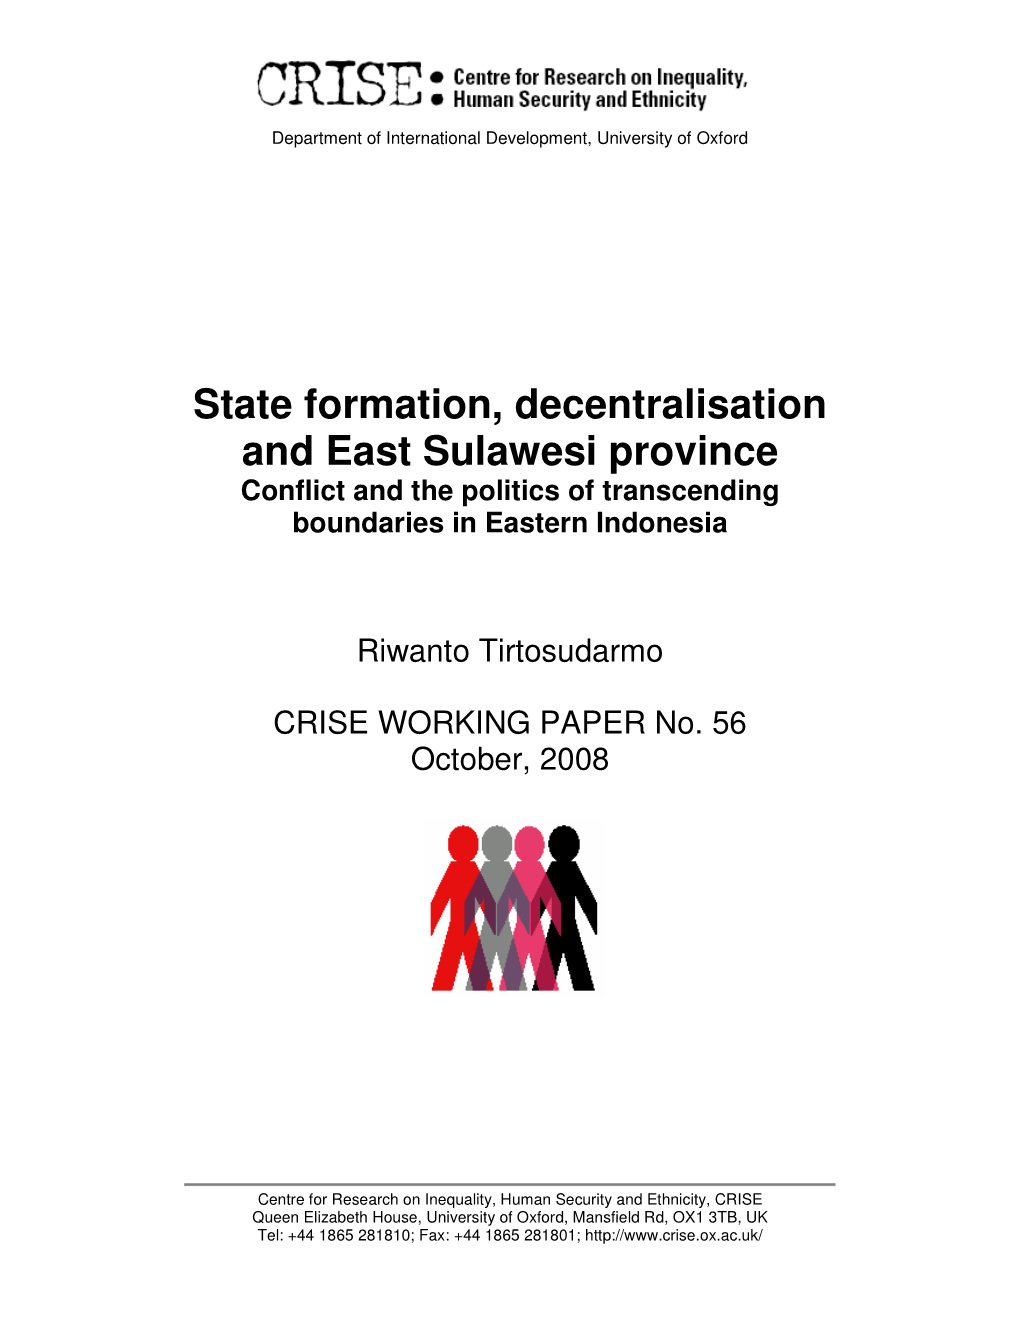 State Formation, Decentralisation and East Sulawesi Province Conflict and the Politics of Transcending Boundaries in Eastern Indonesia